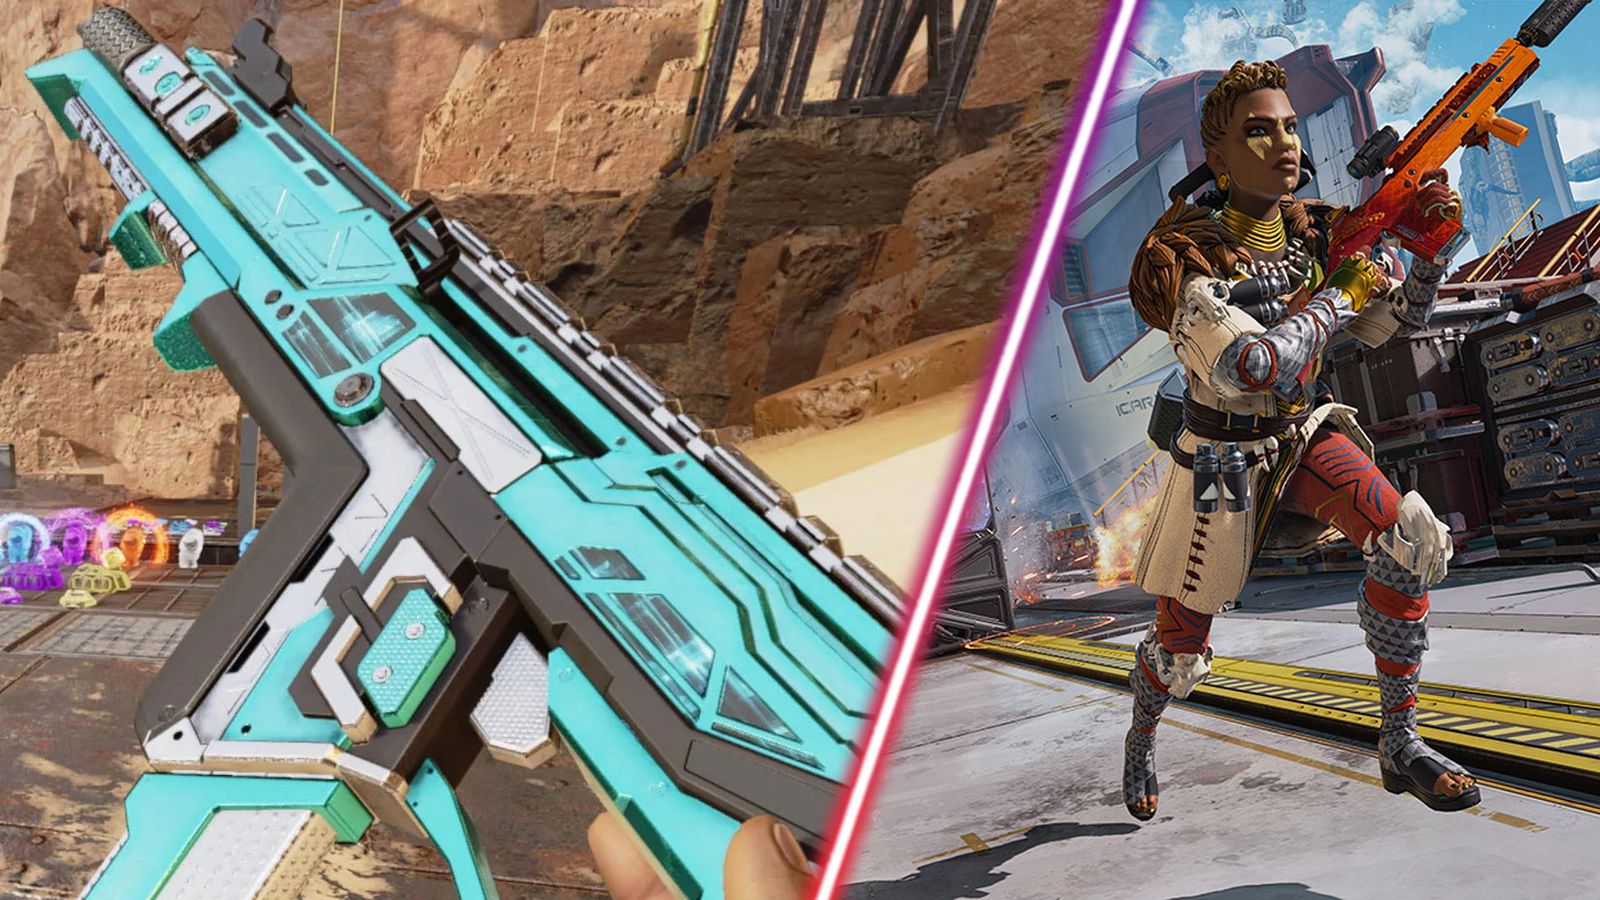 Screenshot of Apex Legends gun and Apex Legends character sprinting while holding gun